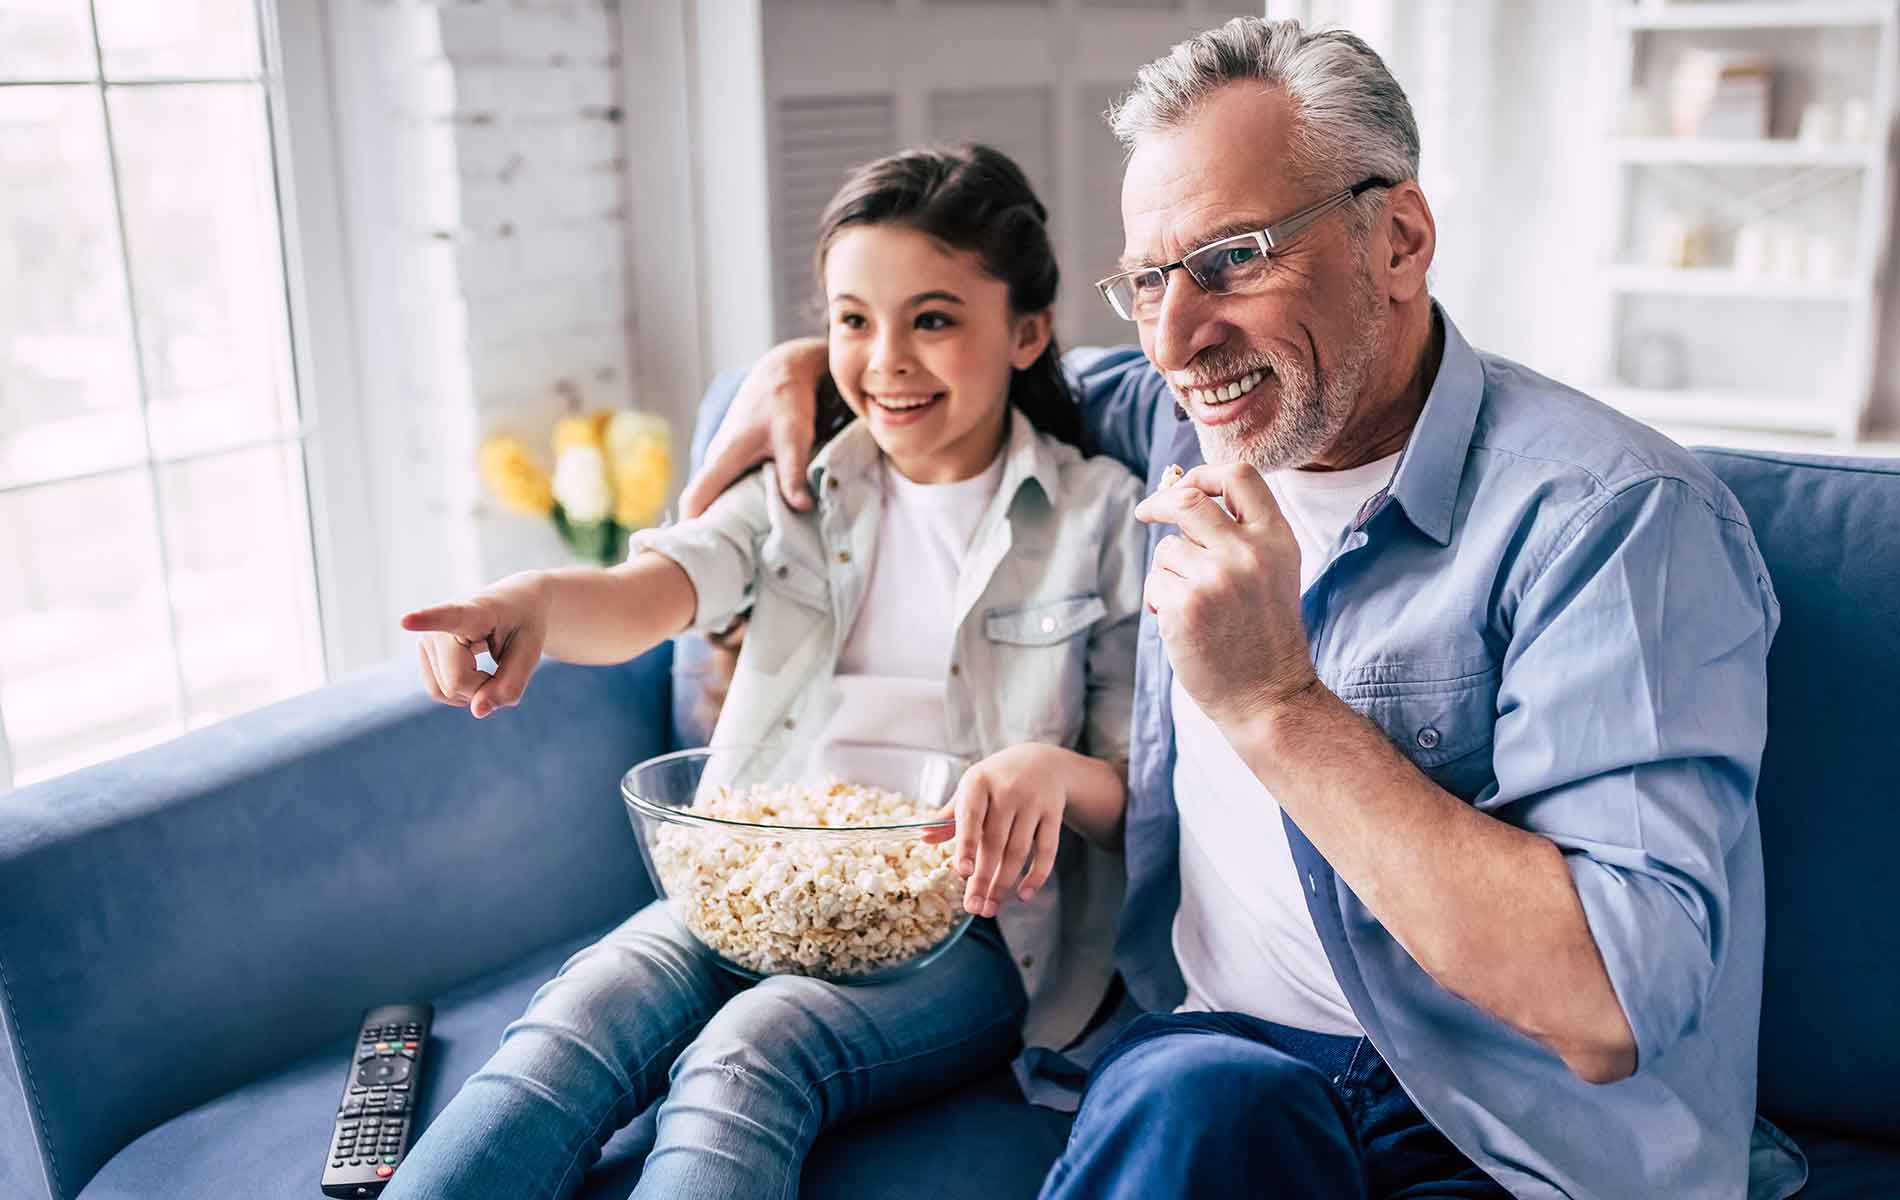 Grand dad with his grand daughter sharing bowl of popcorn sitting on the sofa 